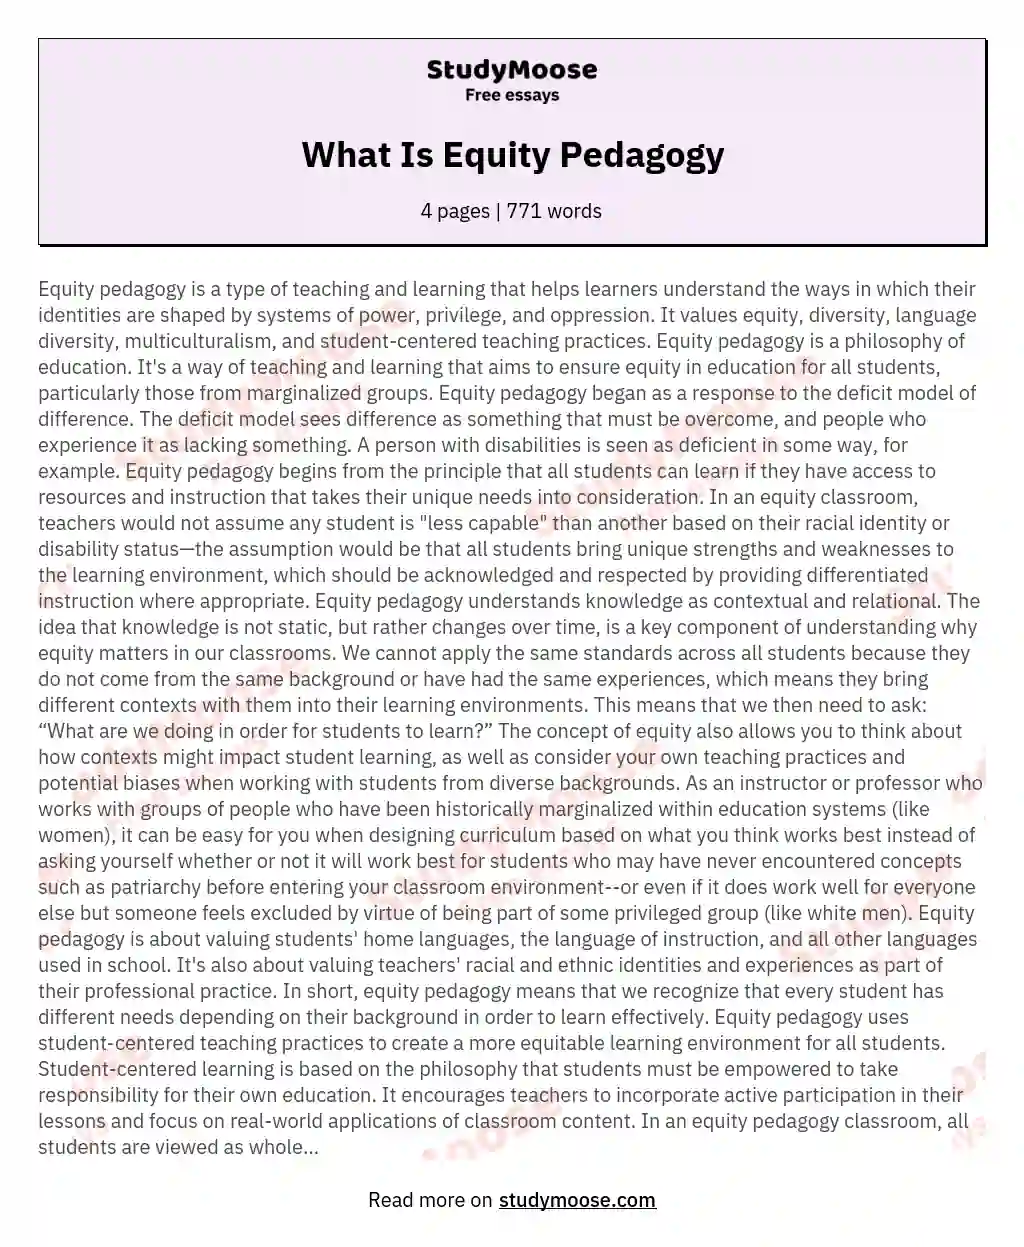 What Is Equity Pedagogy essay